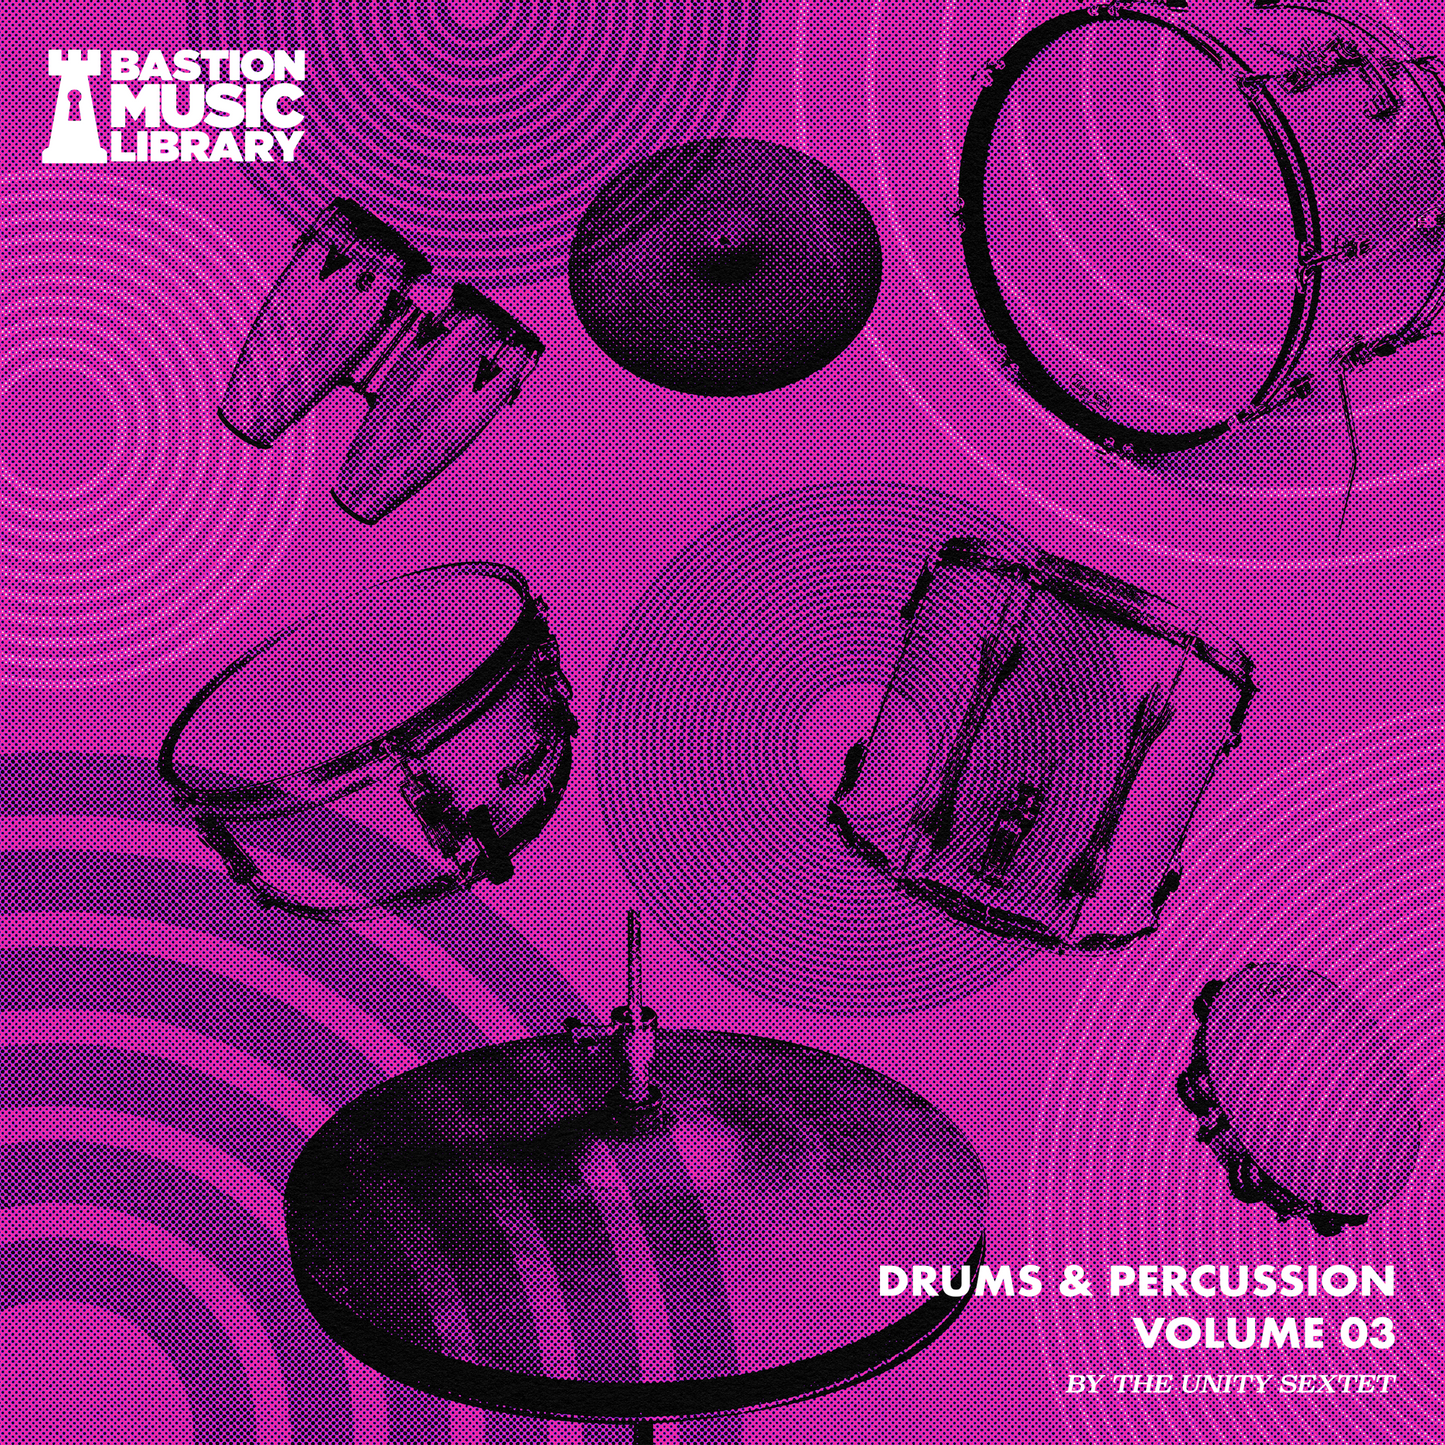 Drums & Percussion Volume 03 by The Unity Sextet